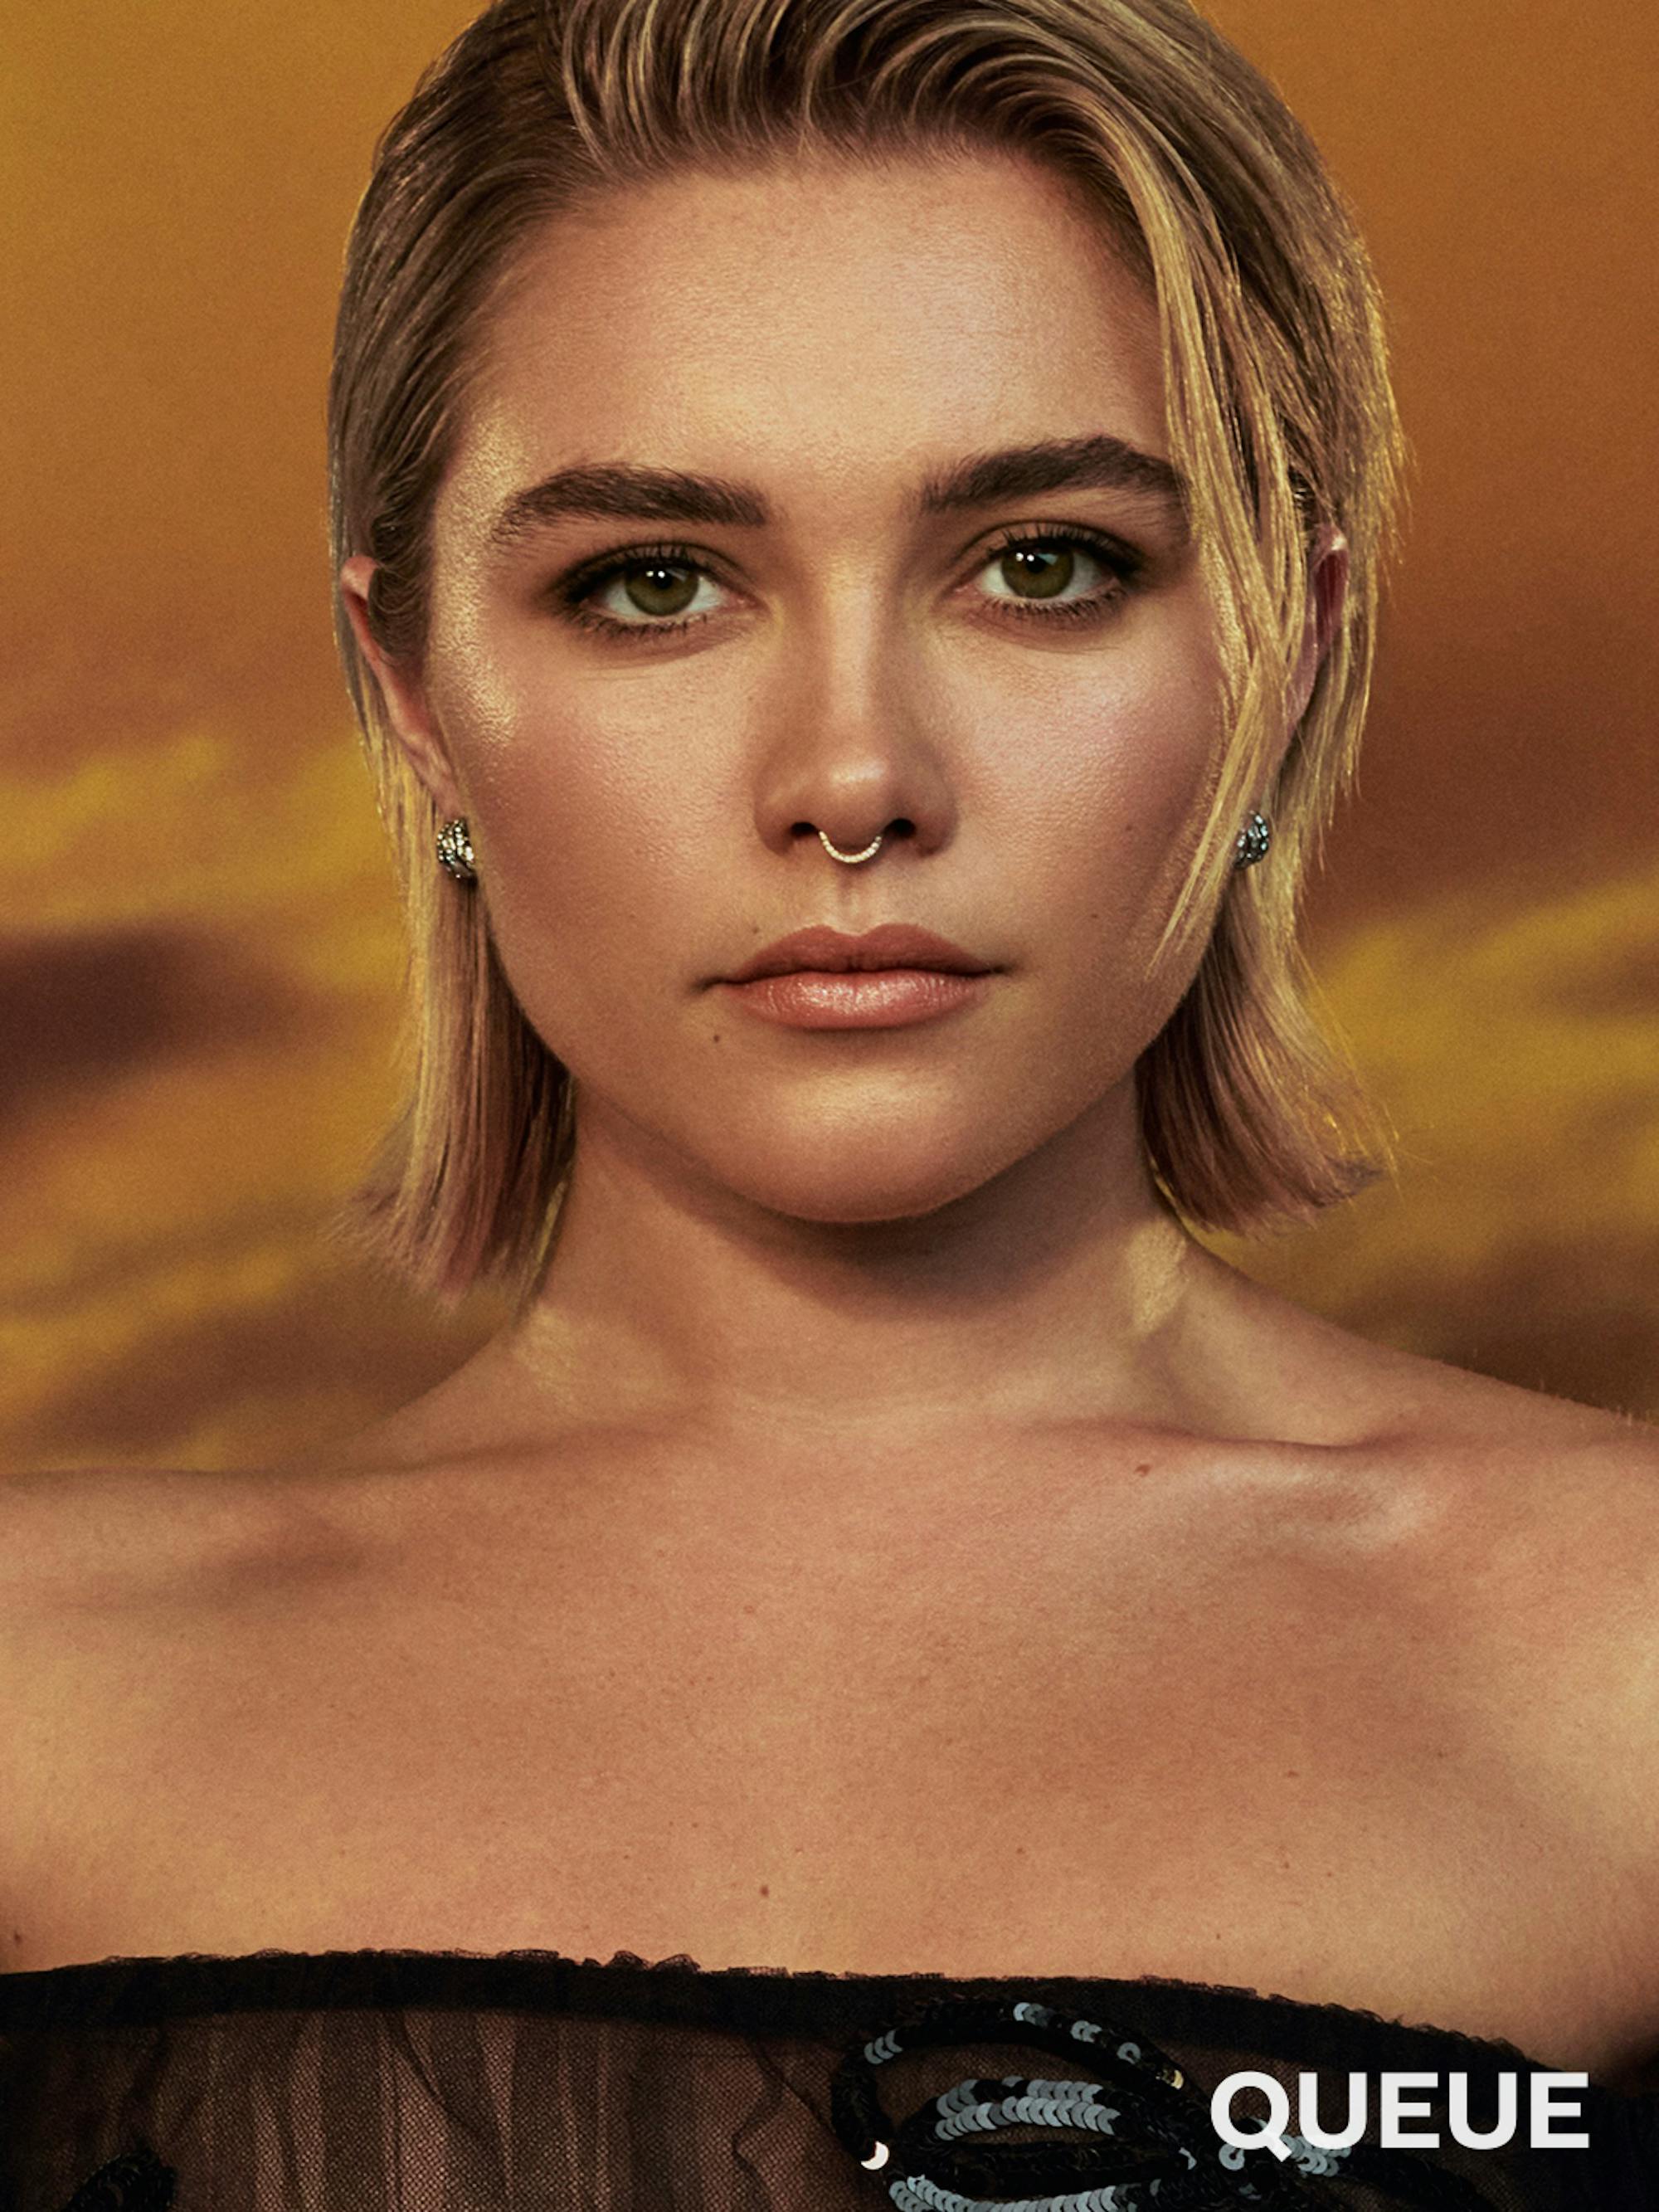 Florence Pugh wears a black sequin sheer dress, nose ring, and earrings.